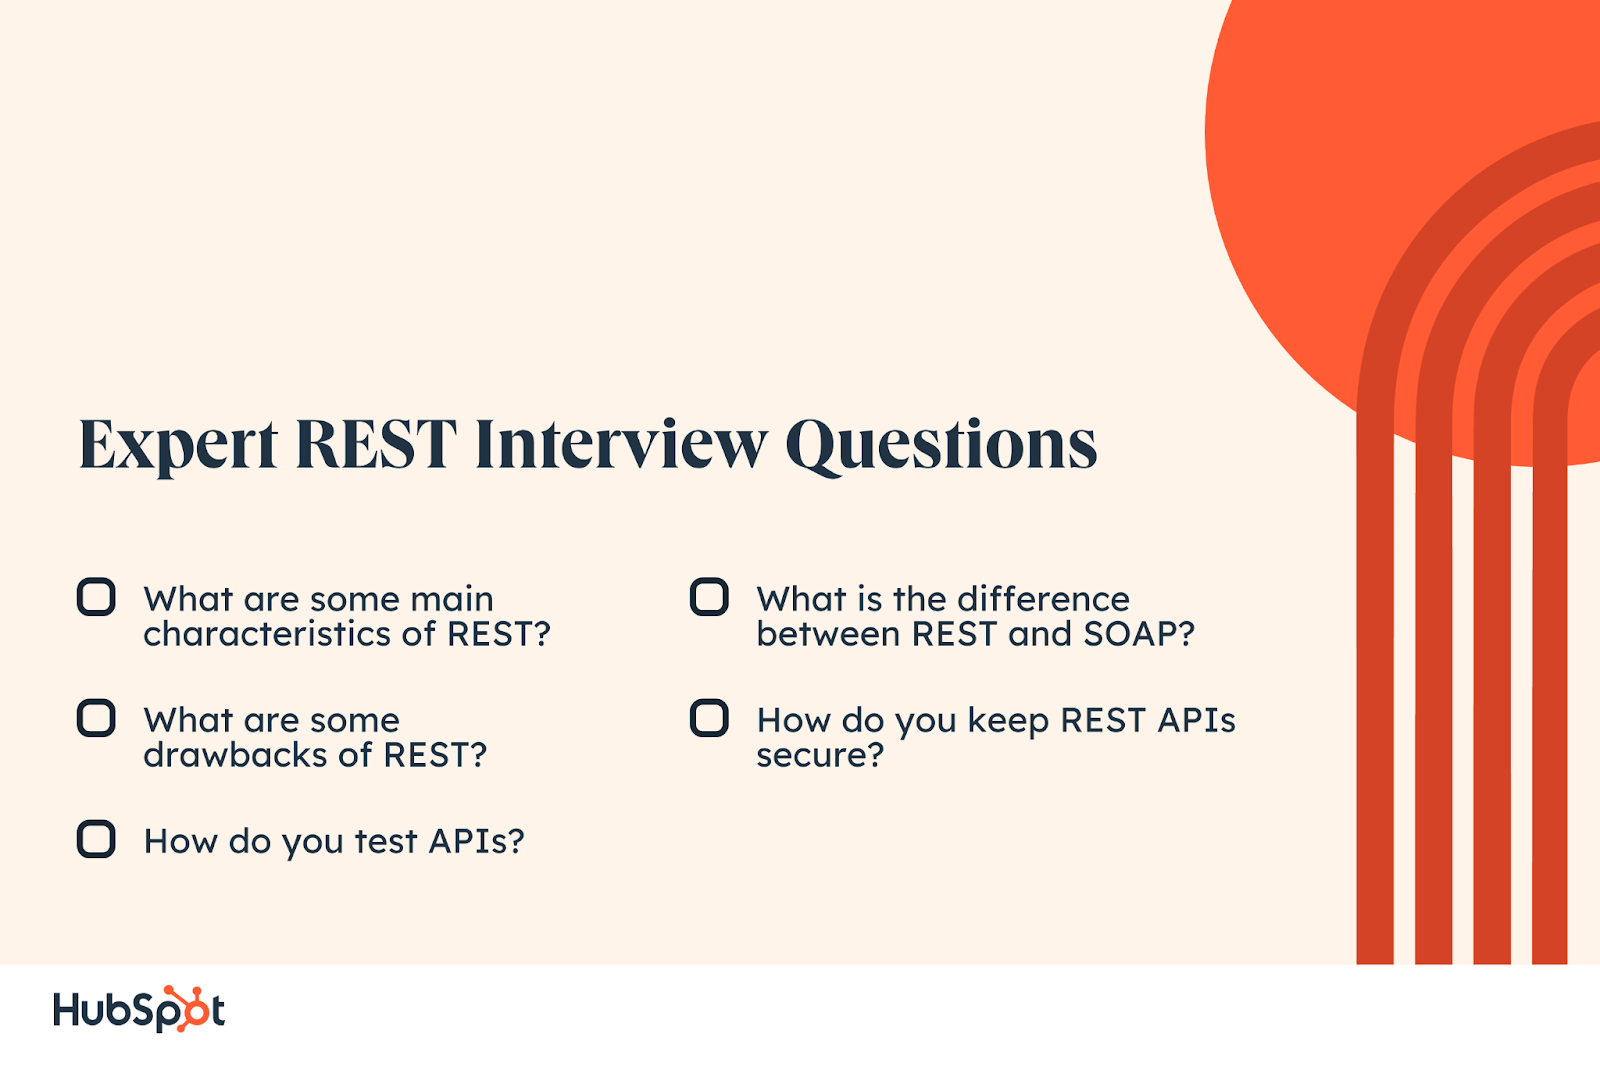 Expert REST Interview Questions What are some main characteristics of REST? What are some drawbacks of REST? How do you test APIs? What is the difference between REST and SOAP? How do you keep REST APIs secure?